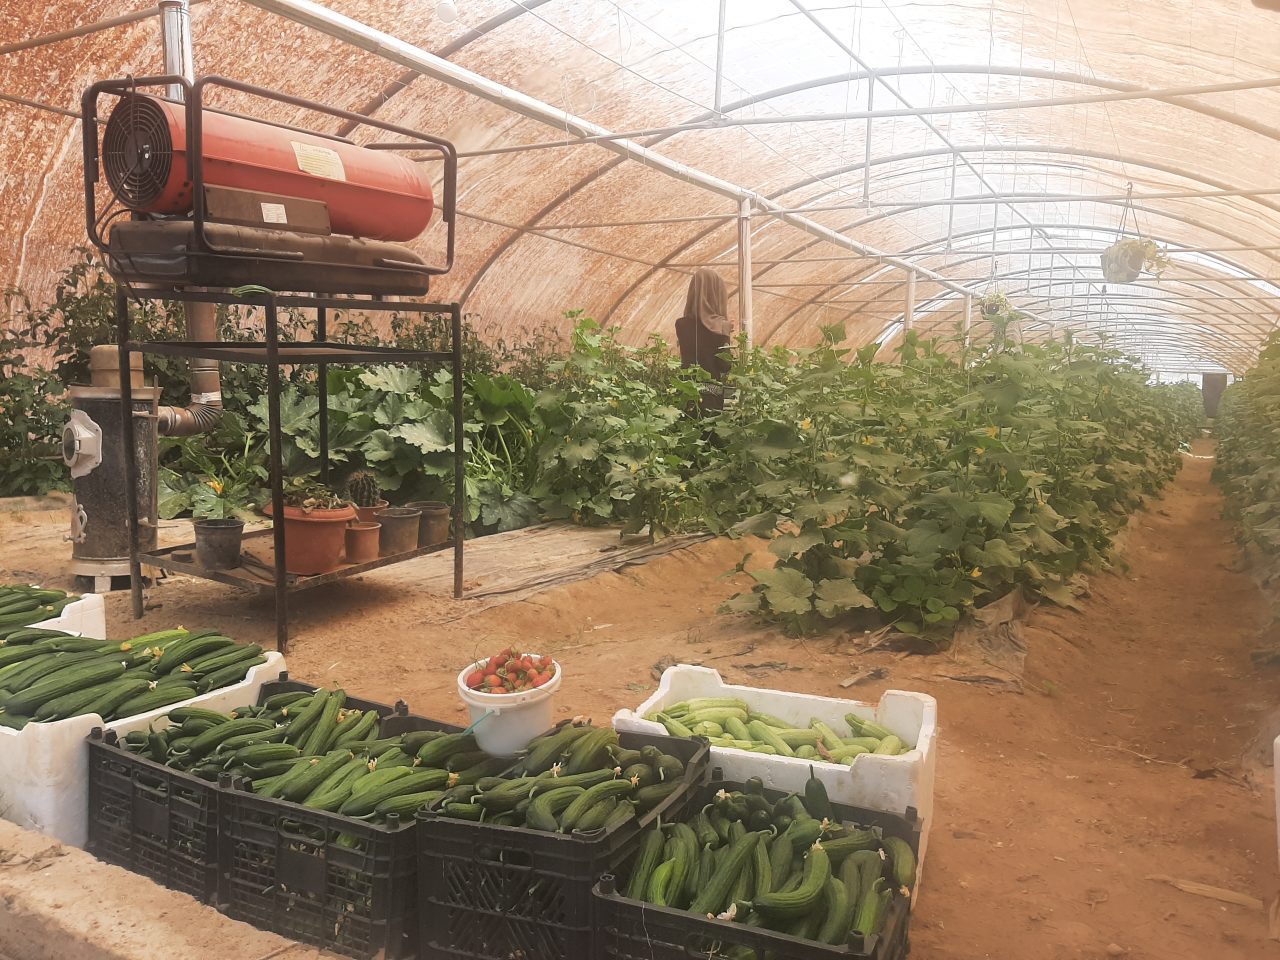 Indoor farming to aid starving population in Syria